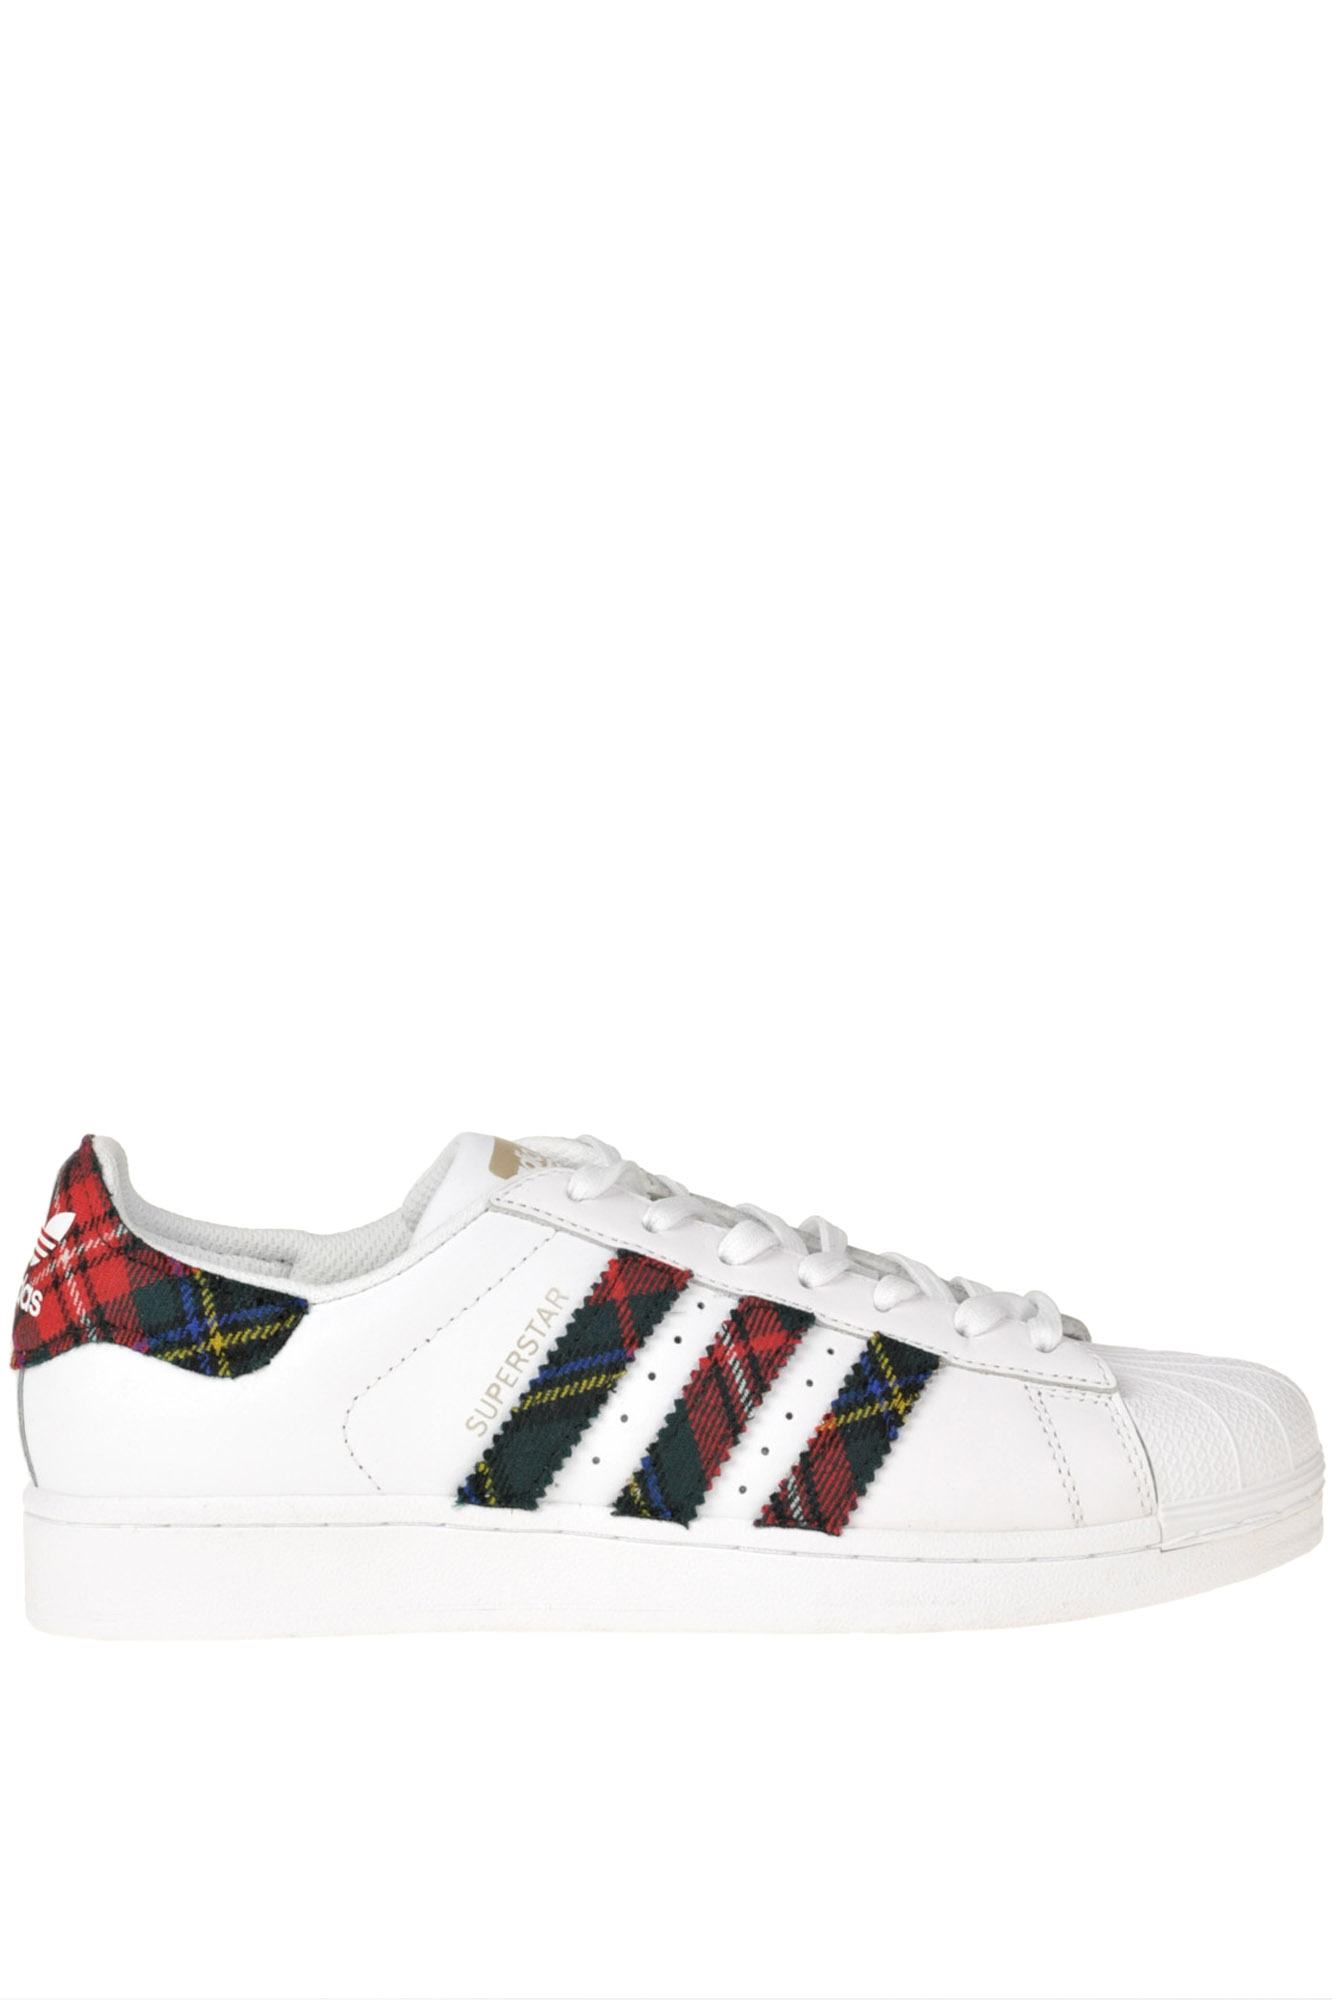 ADIDAS BY DRESSED SUPERSTAR CUSTOMIZED SNEAKERS